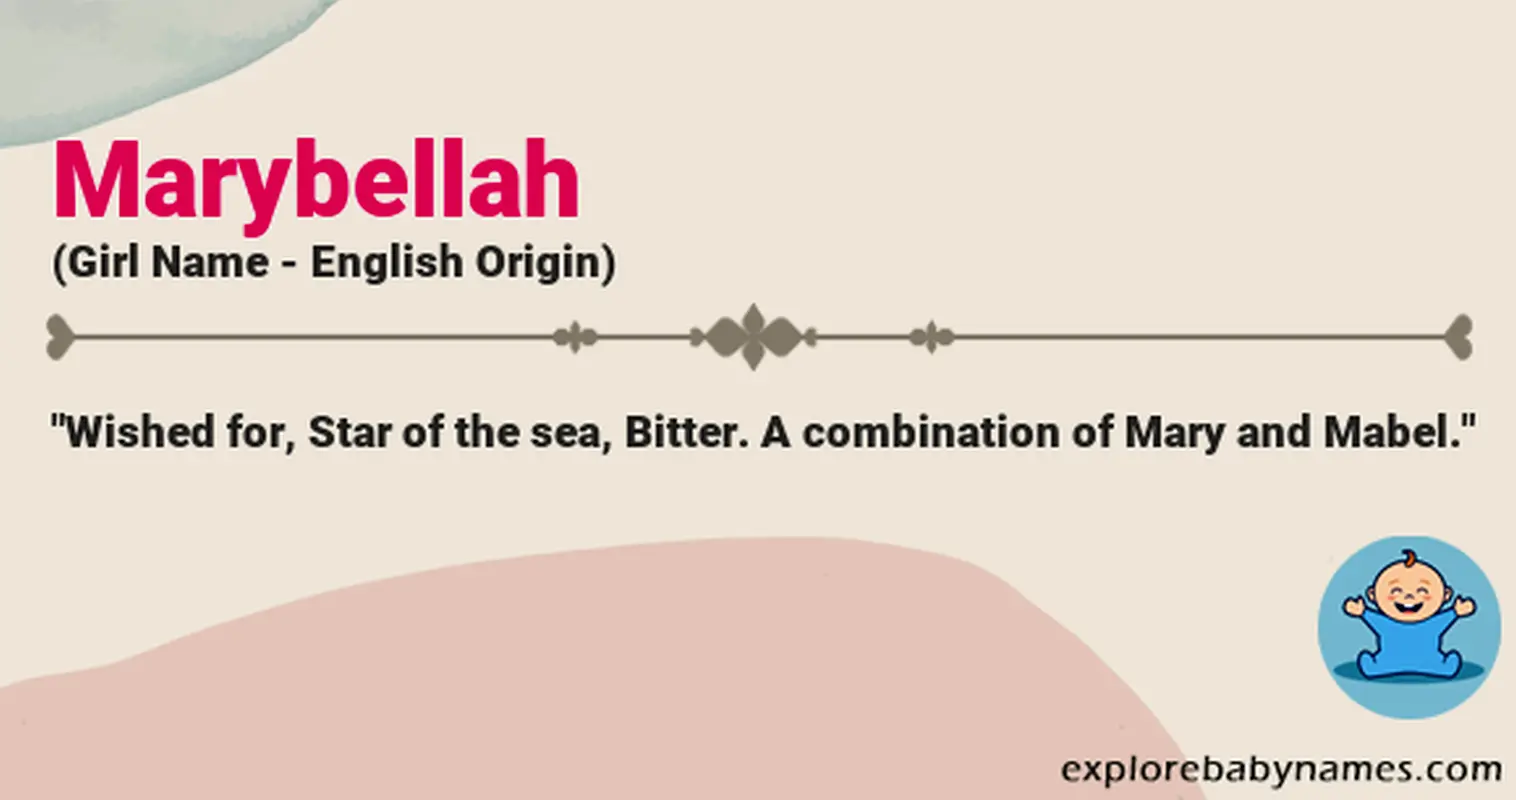 Meaning of Marybellah